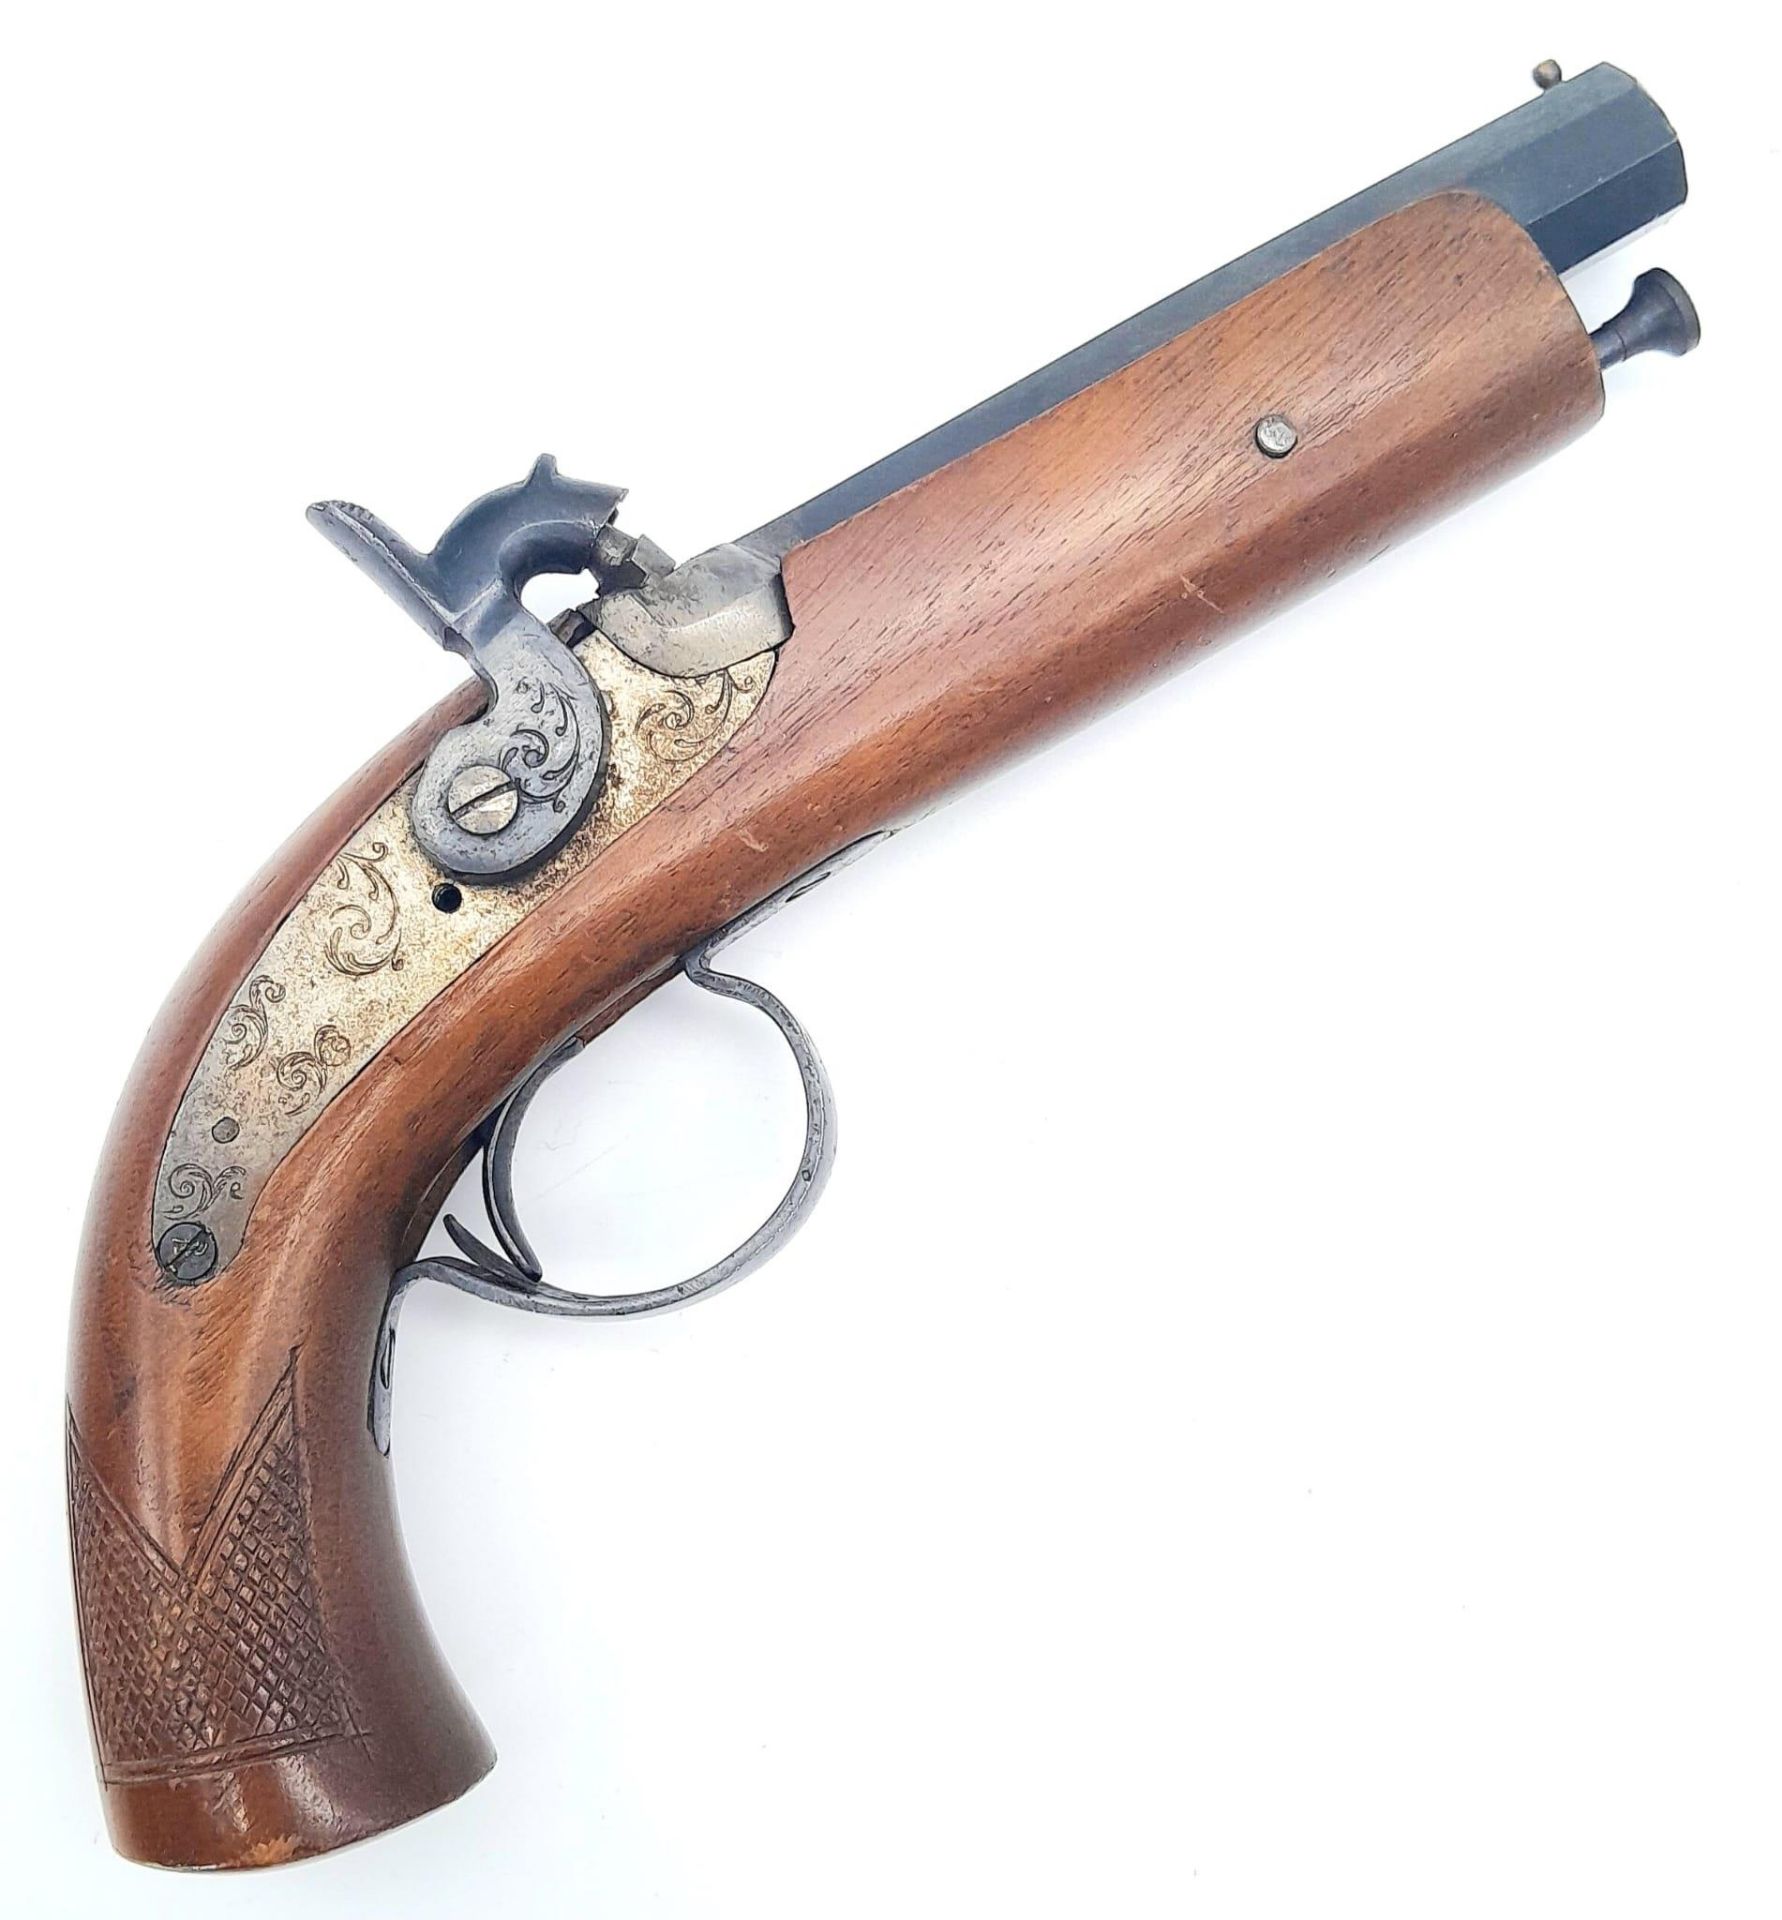 A Deactivated Reproduction Spanish Small Black Powder Muzzle Loading Pistol. Perfect for movie/tv